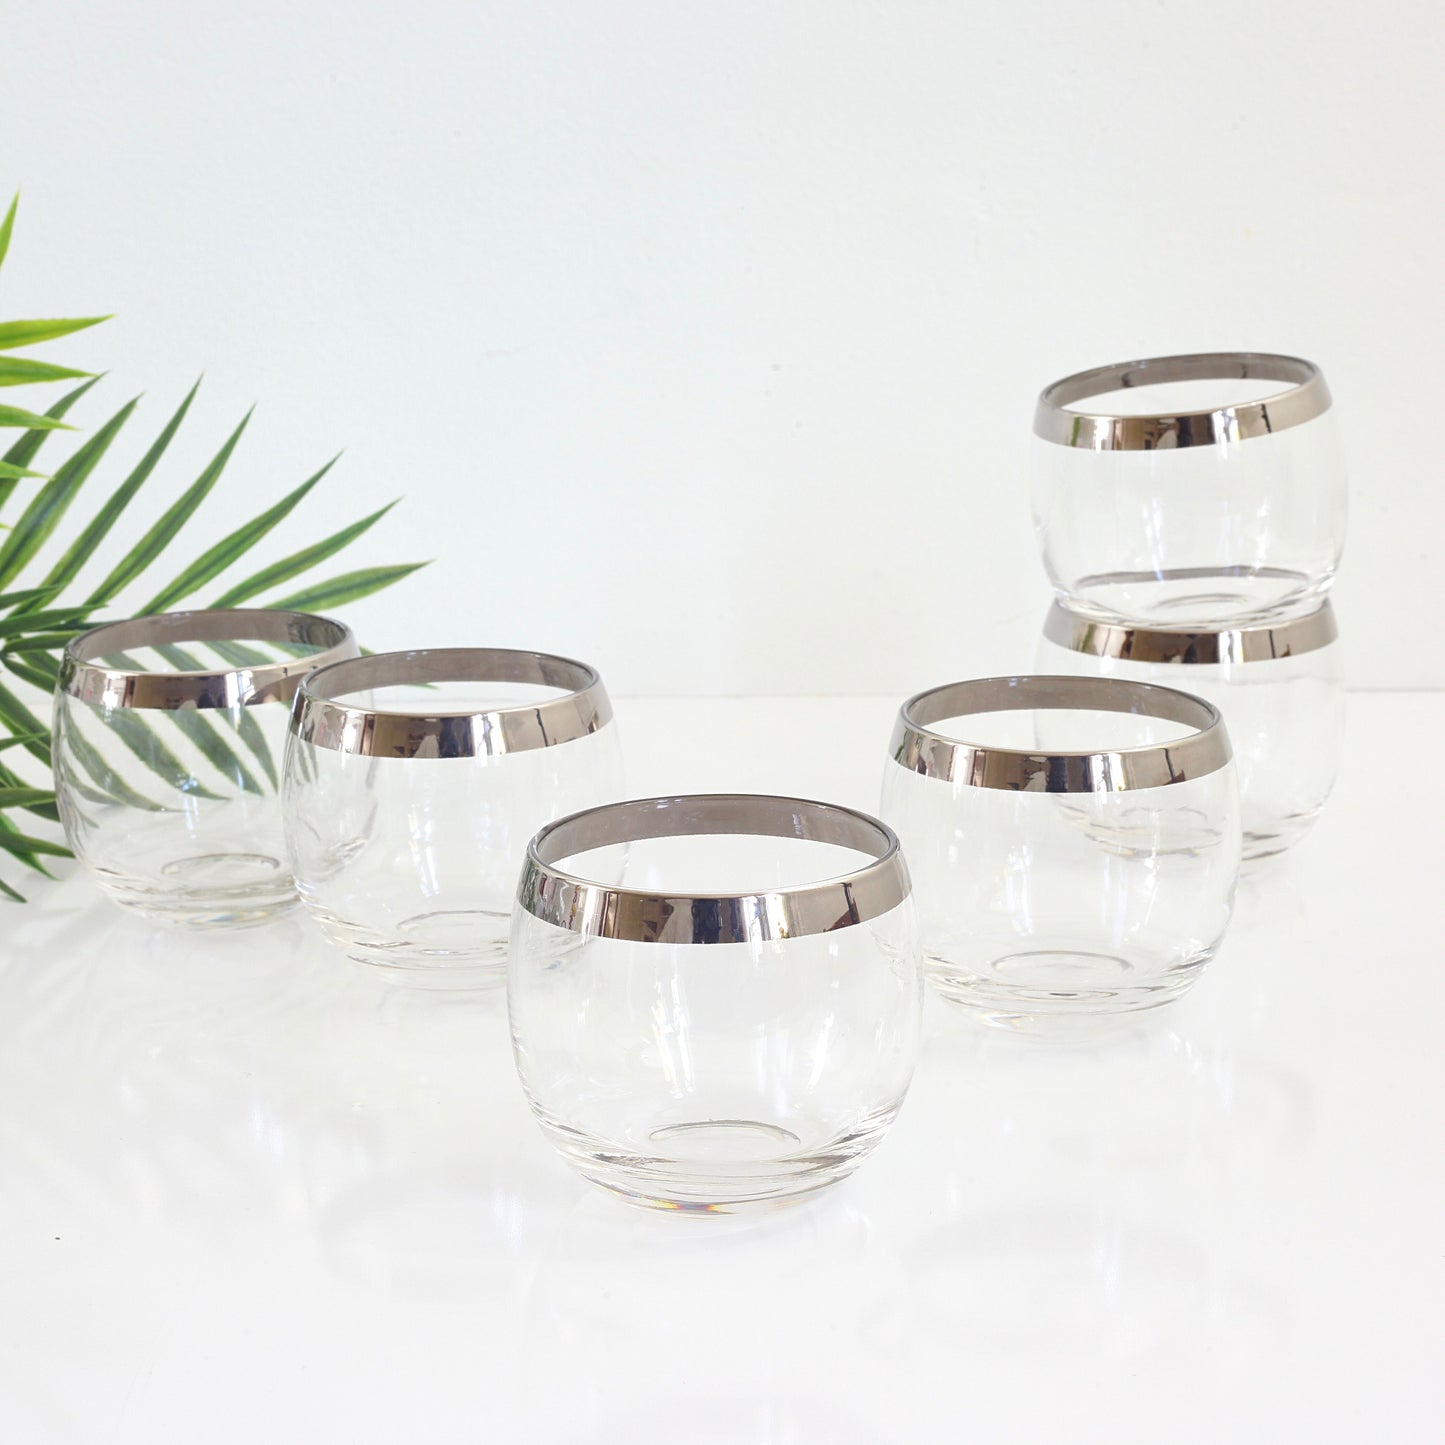 SOLD - Mid Century Silver Rimmed 8oz Roly Poly Cocktail Glasses